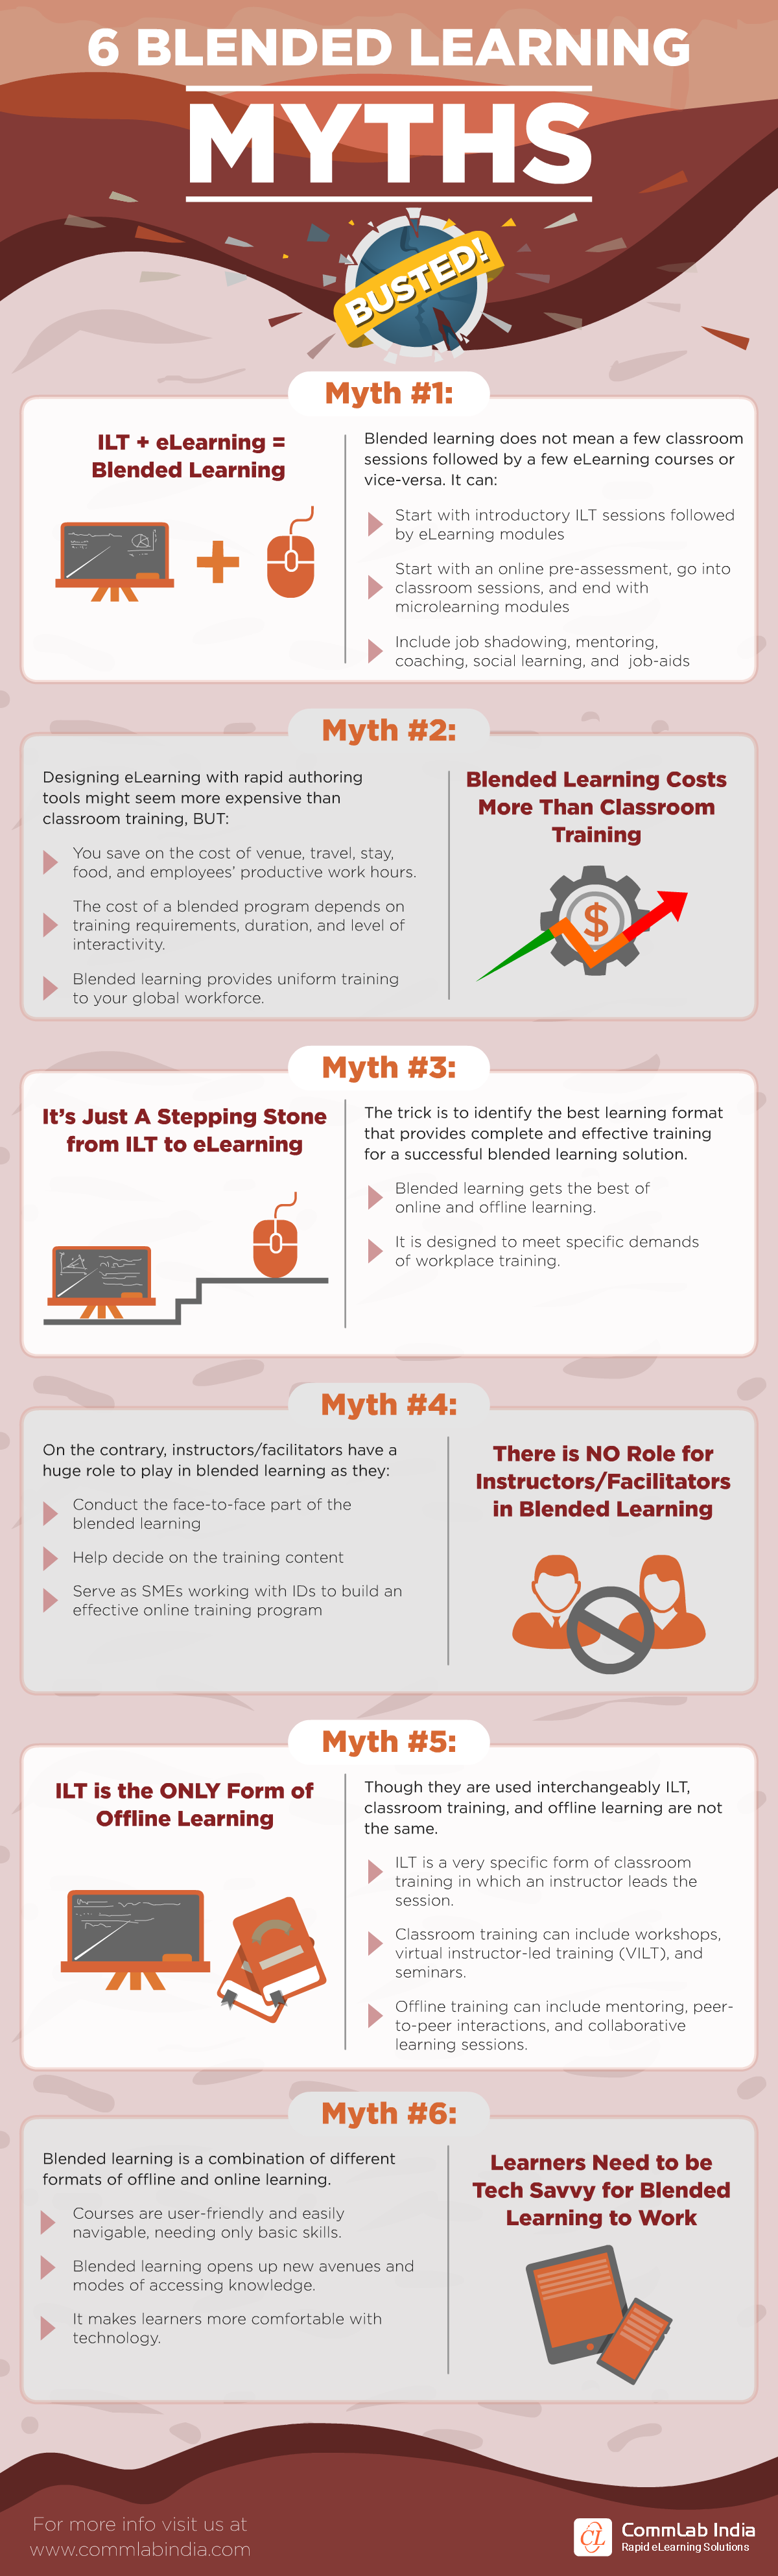 6 Blended Learning Myths Busted [Infographic]